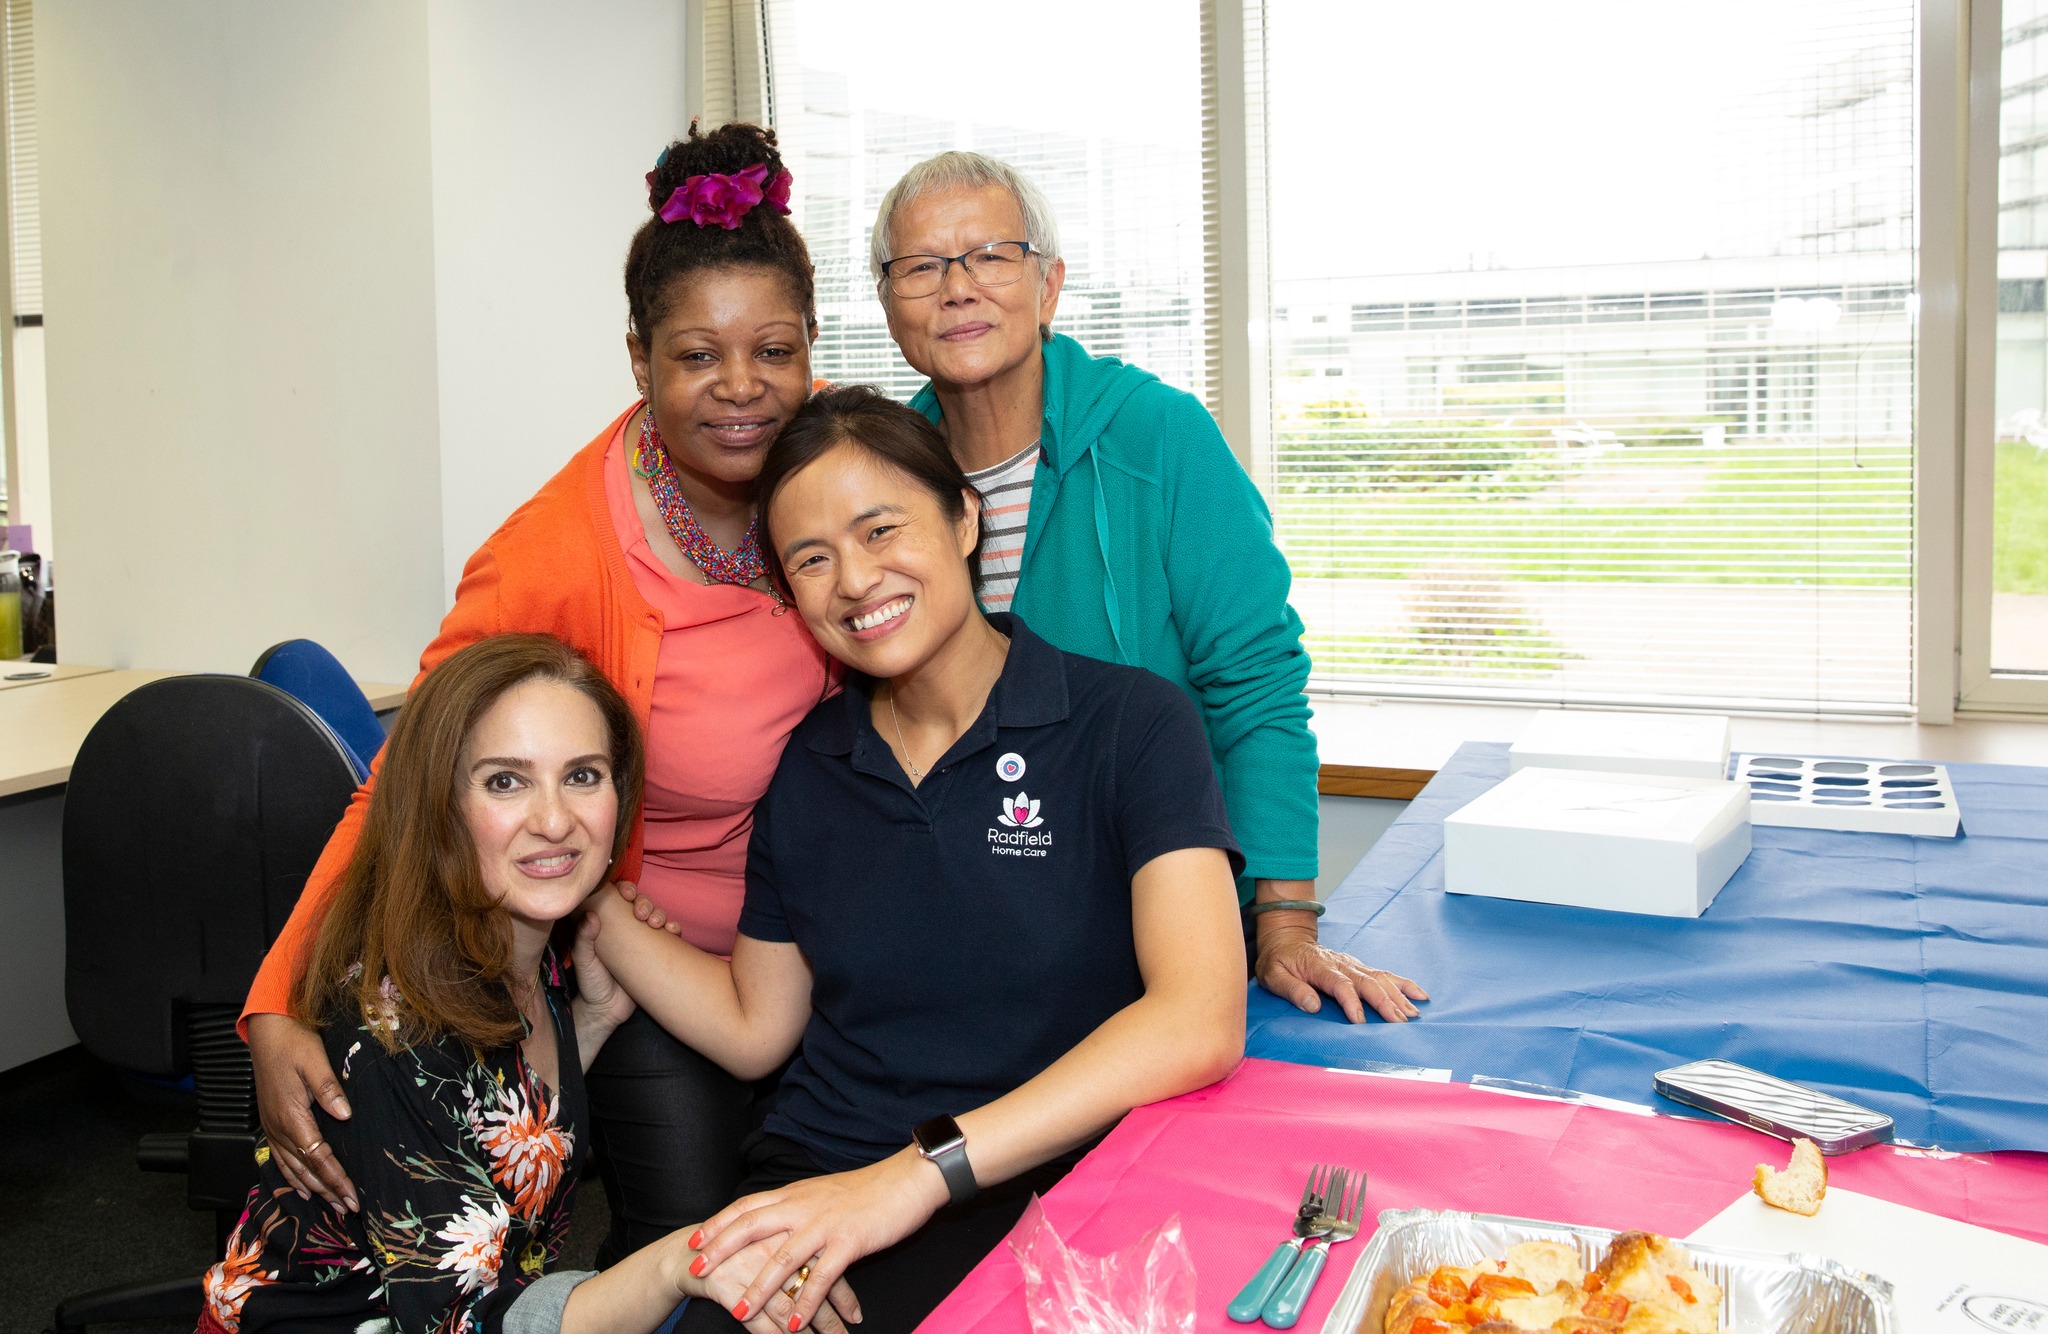 Bringing Joy and Connection at Radfield Home Care Barnet and Finchley Annual Picnic Event